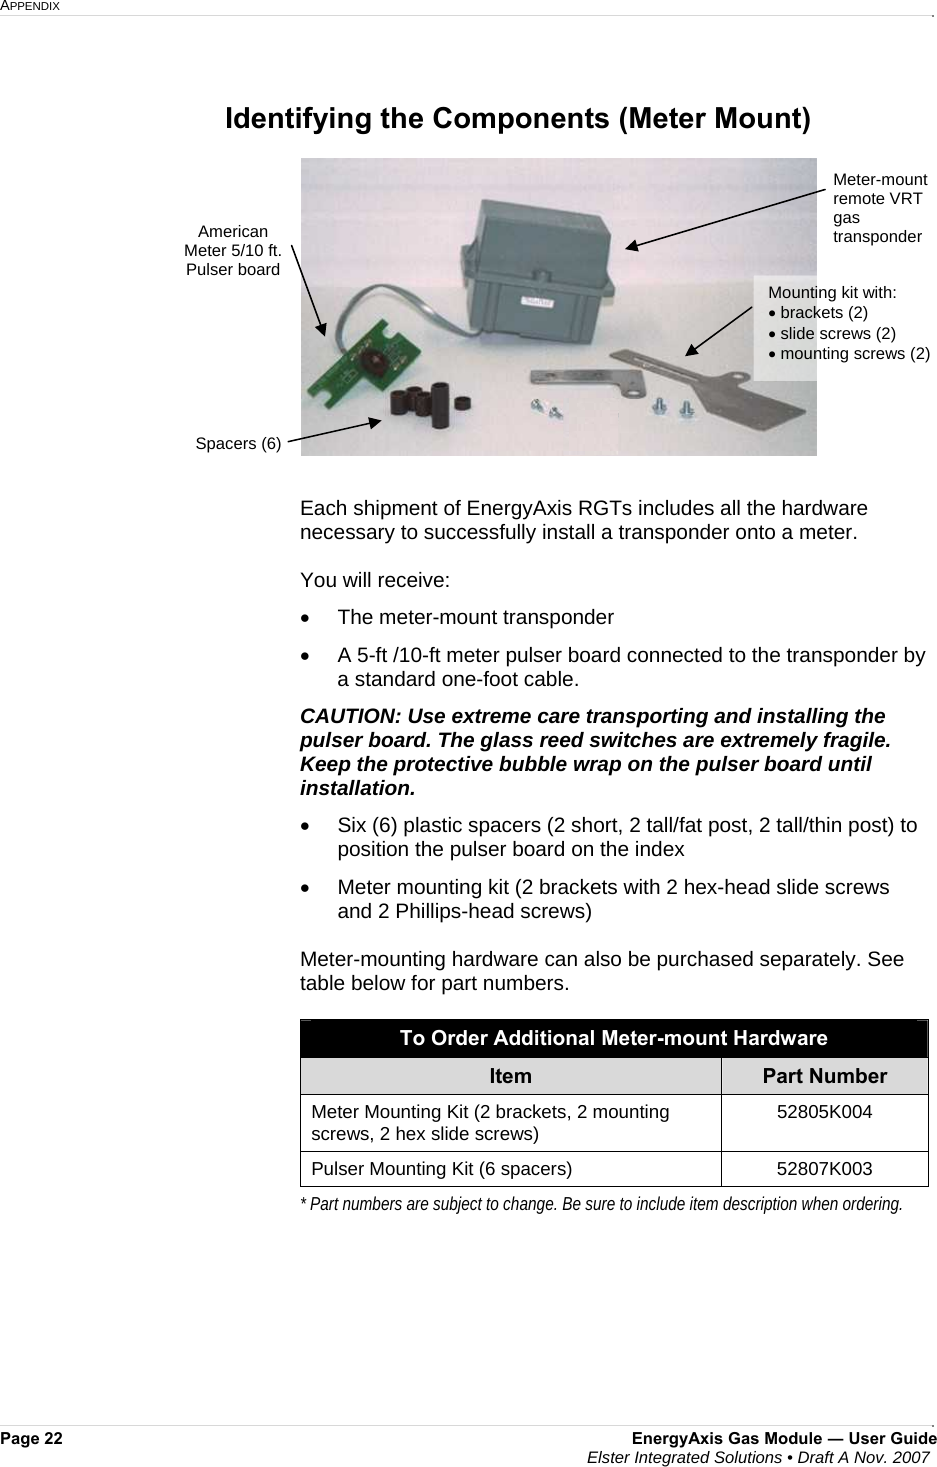 APPENDIX     Page 22  EnergyAxis Gas Module ― User Guide  Elster Integrated Solutions • Draft A Nov. 2007   Identifying the Components (Meter Mount)   Each shipment of EnergyAxis RGTs includes all the hardware necessary to successfully install a transponder onto a meter.   You will receive: •  The meter-mount transponder  •  A 5-ft /10-ft meter pulser board connected to the transponder by a standard one-foot cable. CAUTION: Use extreme care transporting and installing the pulser board. The glass reed switches are extremely fragile. Keep the protective bubble wrap on the pulser board until installation. •  Six (6) plastic spacers (2 short, 2 tall/fat post, 2 tall/thin post) to position the pulser board on the index •  Meter mounting kit (2 brackets with 2 hex-head slide screws and 2 Phillips-head screws)  Meter-mounting hardware can also be purchased separately. See table below for part numbers.  To Order Additional Meter-mount Hardware Item  Part Number Meter Mounting Kit (2 brackets, 2 mounting screws, 2 hex slide screws)  52805K004 Pulser Mounting Kit (6 spacers)  52807K003 * Part numbers are subject to change. Be sure to include item description when ordering.  American Meter 5/10 ft. Pulser board  Mounting kit with: • brackets (2) • slide screws (2) • mounting screws (2) Spacers (6) Meter-mount  remote VRT gas transponder